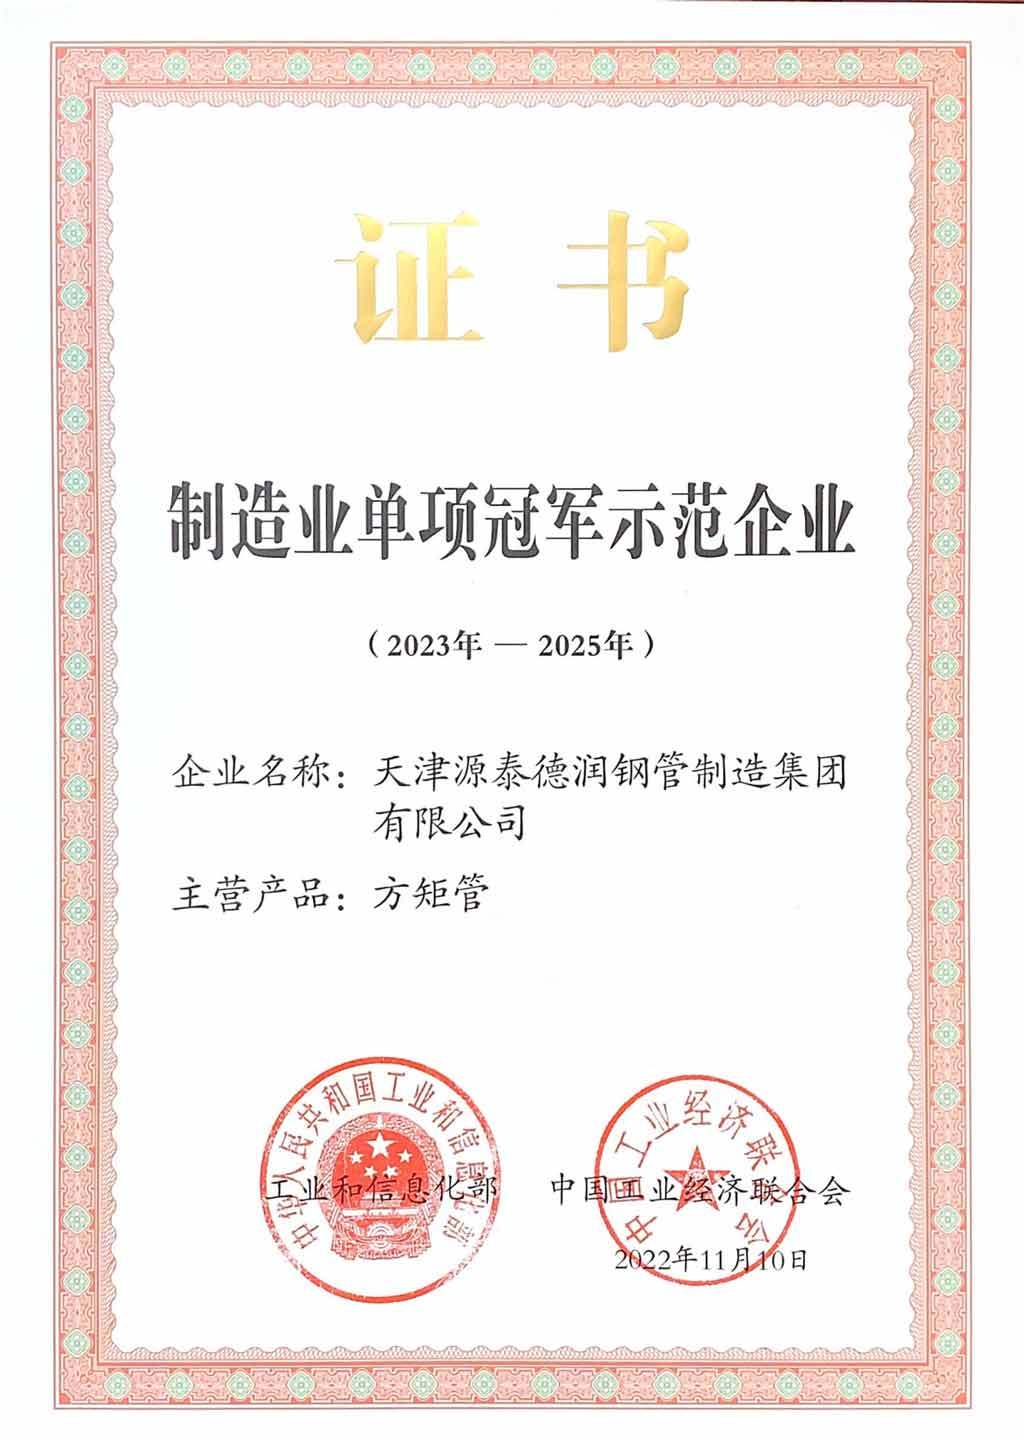 Tianjin Yuantai Derun Steel Pipe Manufacturing Group Co., Ltd. was selected as the seventh batch of national level single champion demonstration enterprises in the manufacturing industry